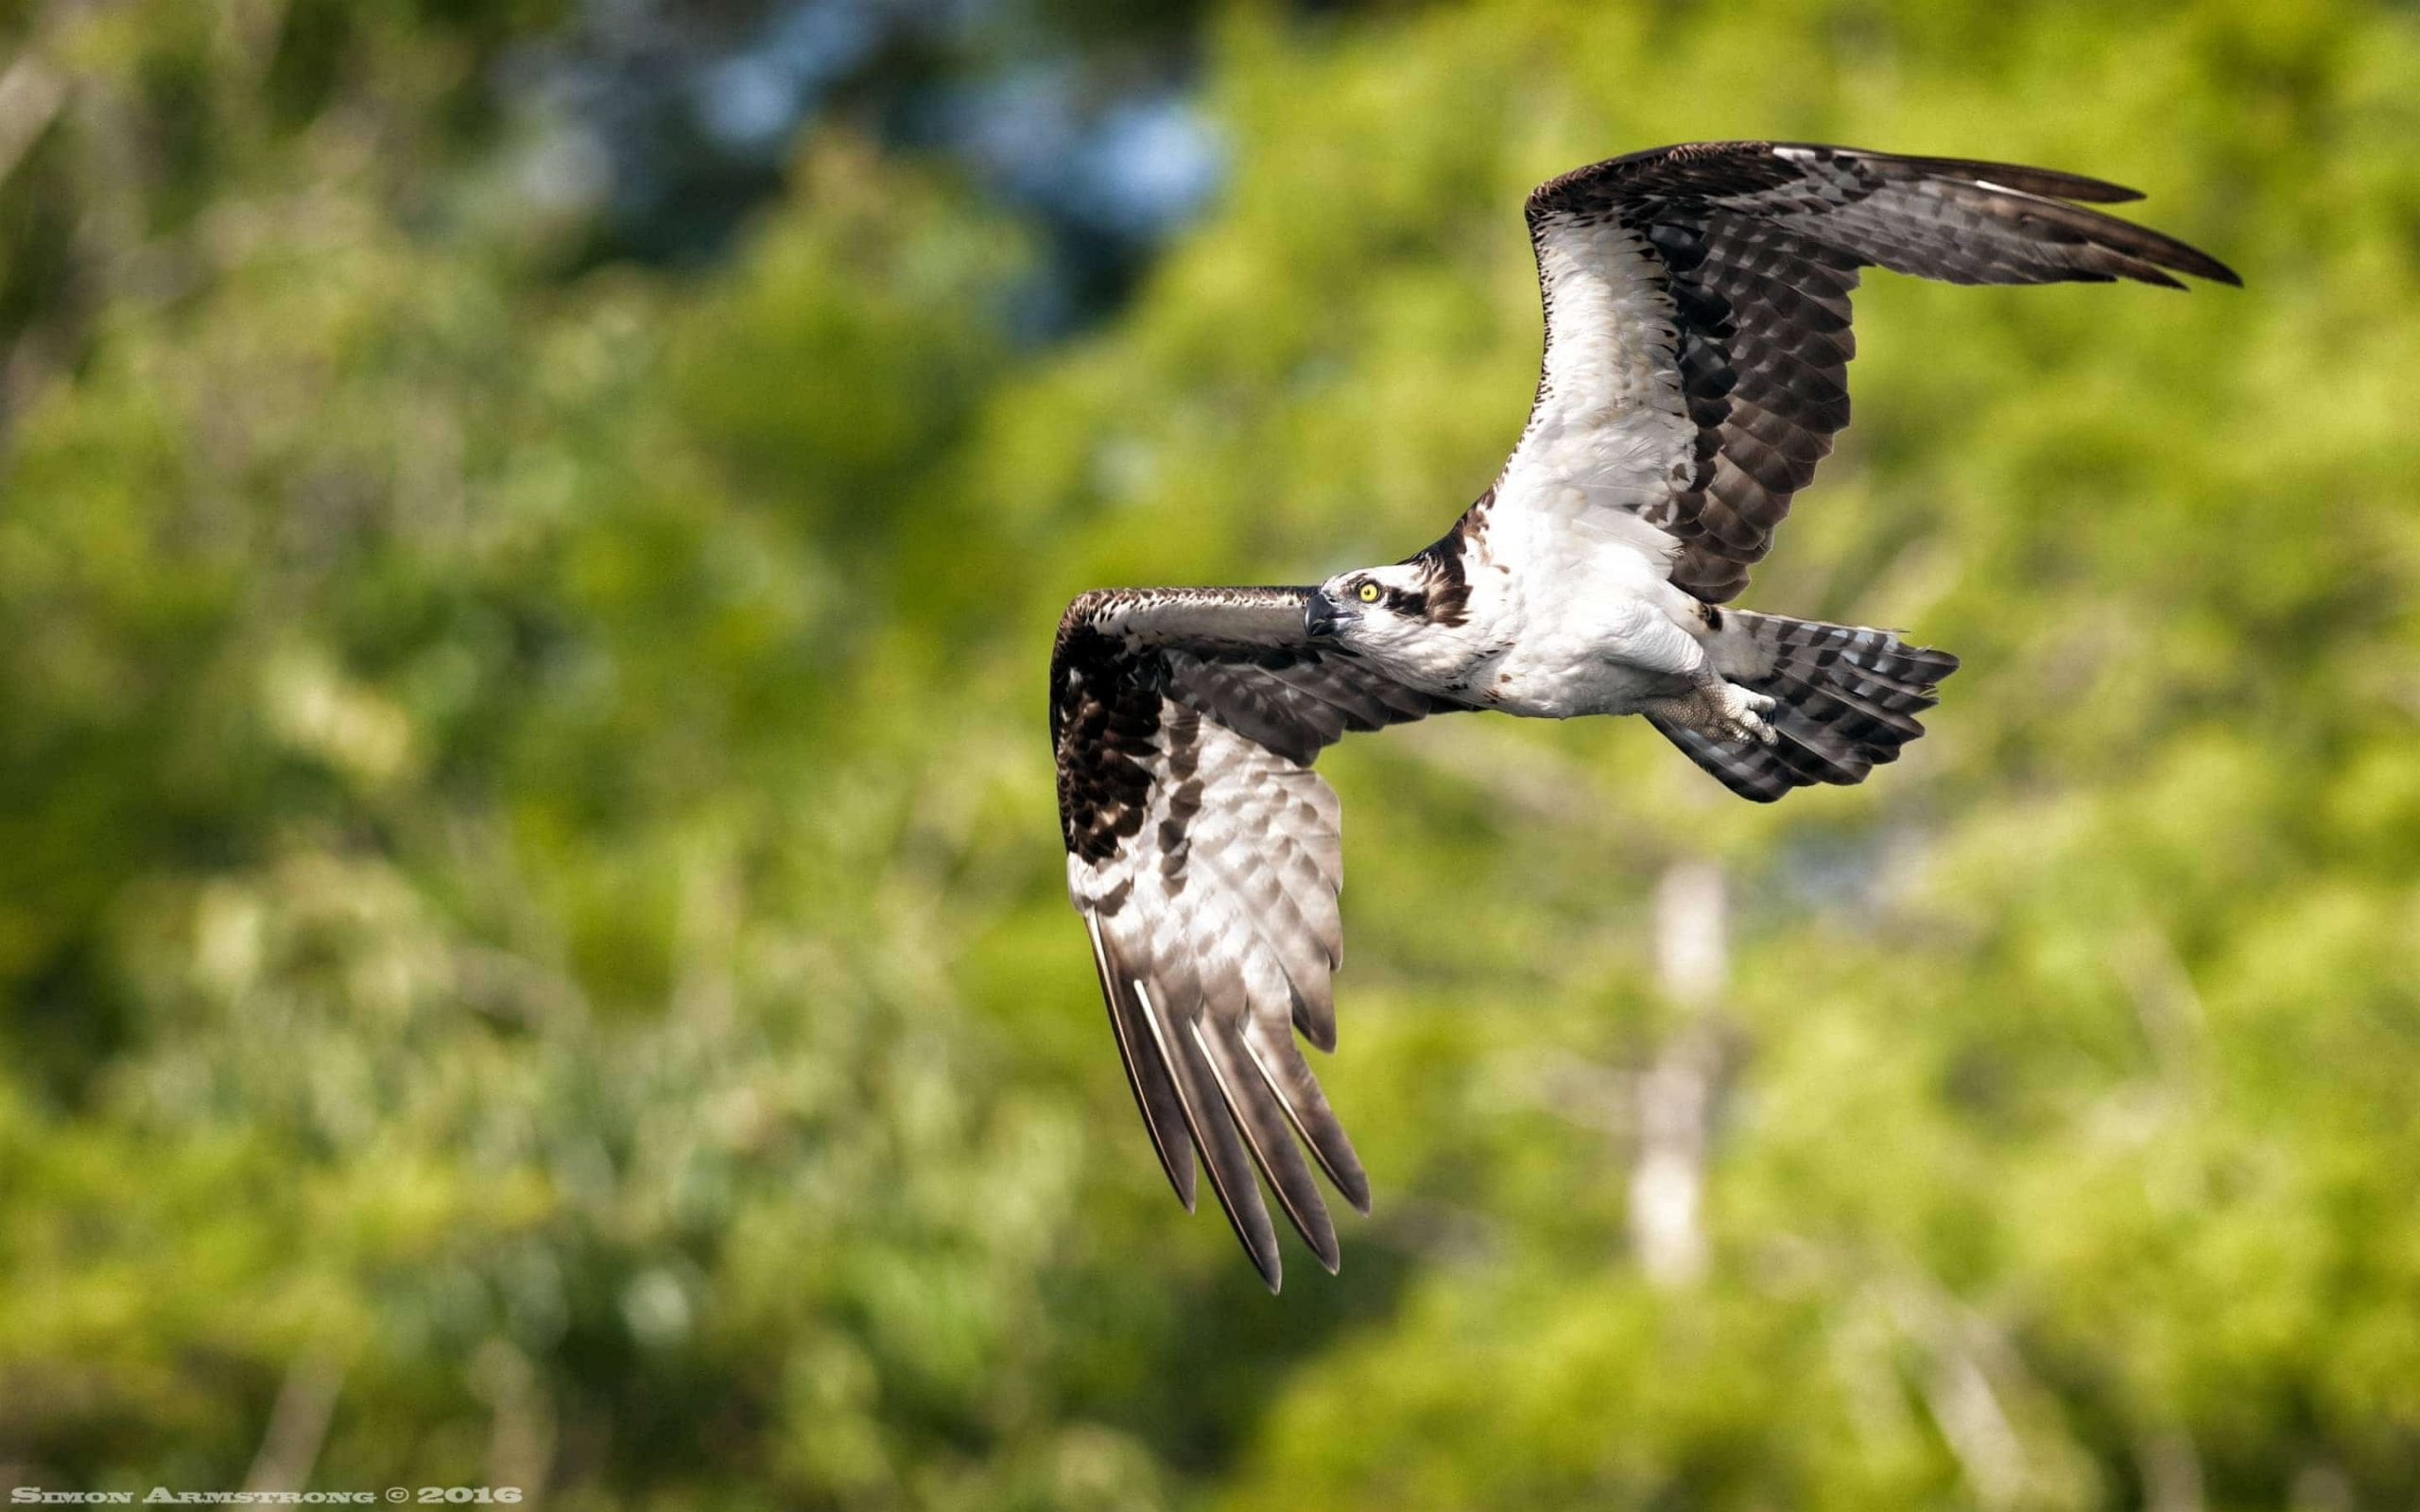 Heading out to make another catch one of the many ospreys that flew above the boat evey morning photographed on the NaturesLens Ospreys of Blue Cypress Lake Photography Holiday scaled